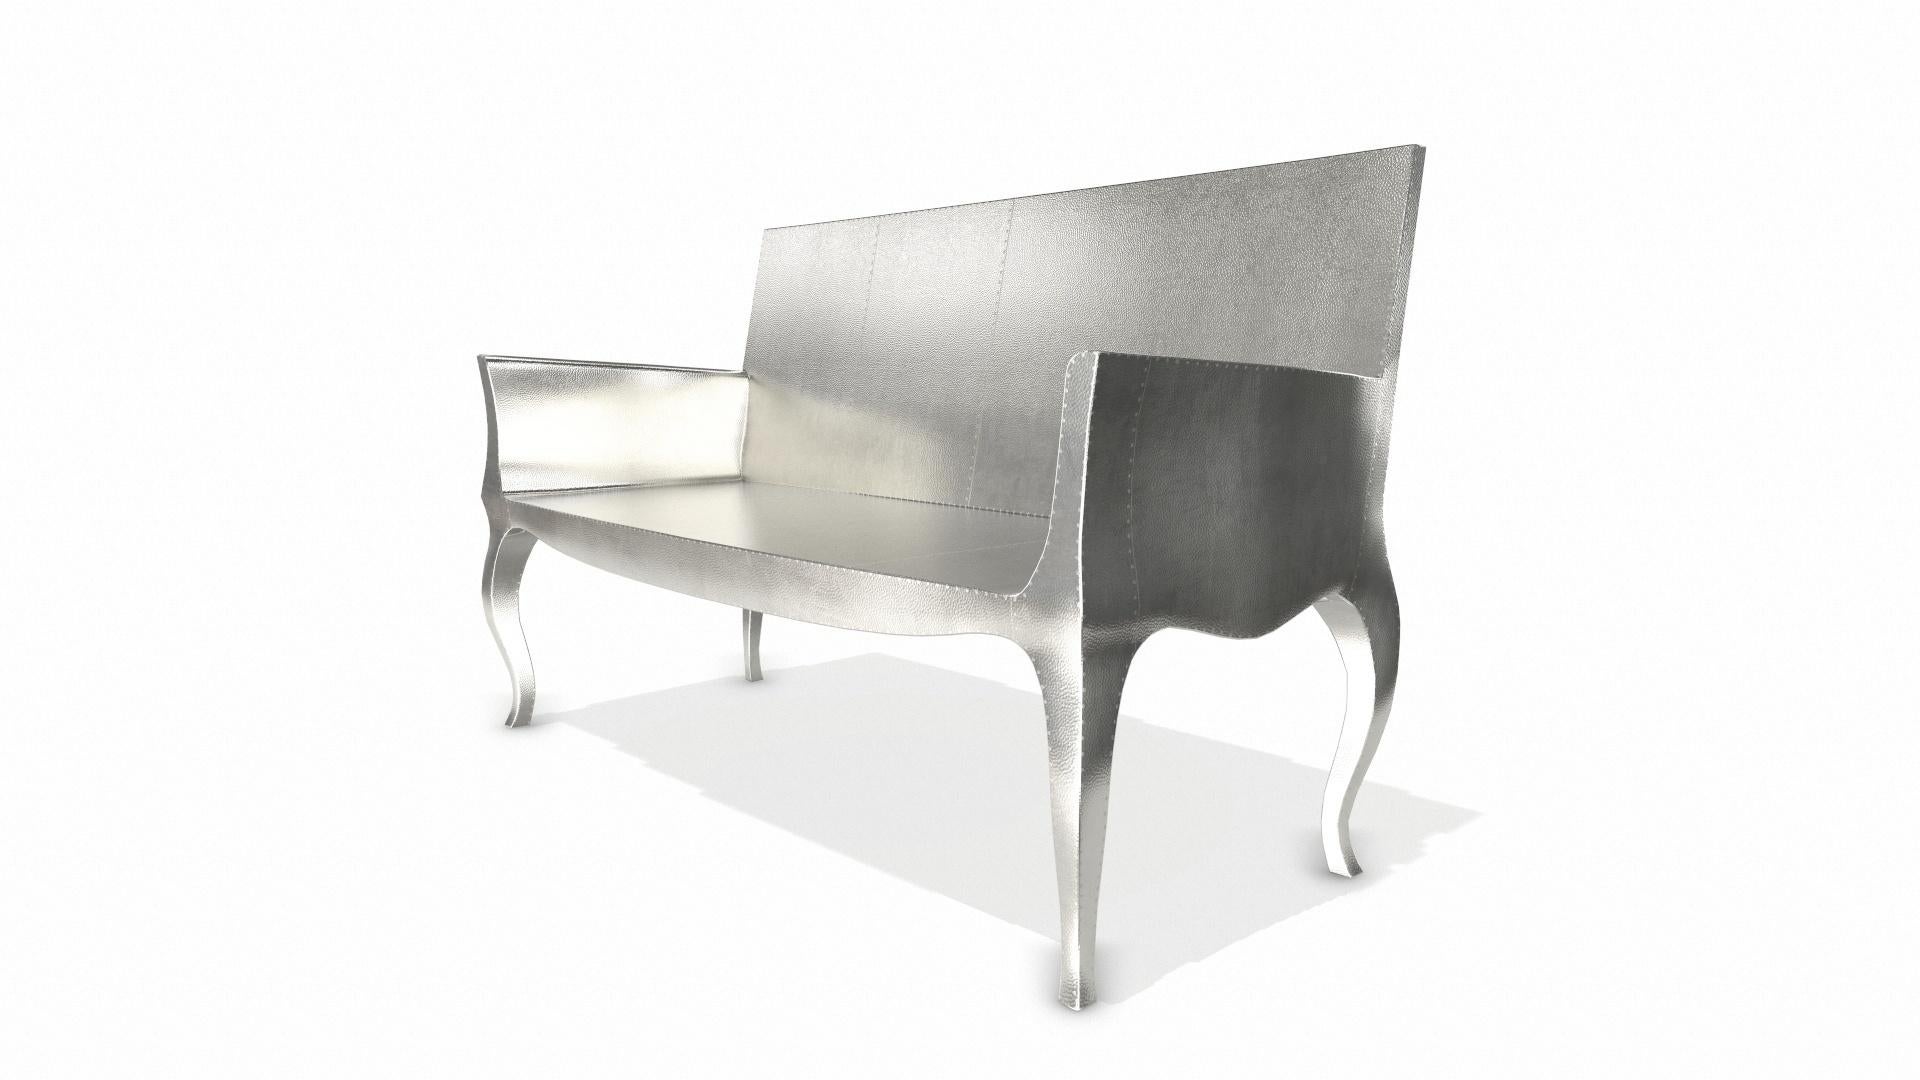 Woodwork Louise Settee Art Deco Daybeds in Mid. Hammered White Bronze by Paul Mathieu For Sale